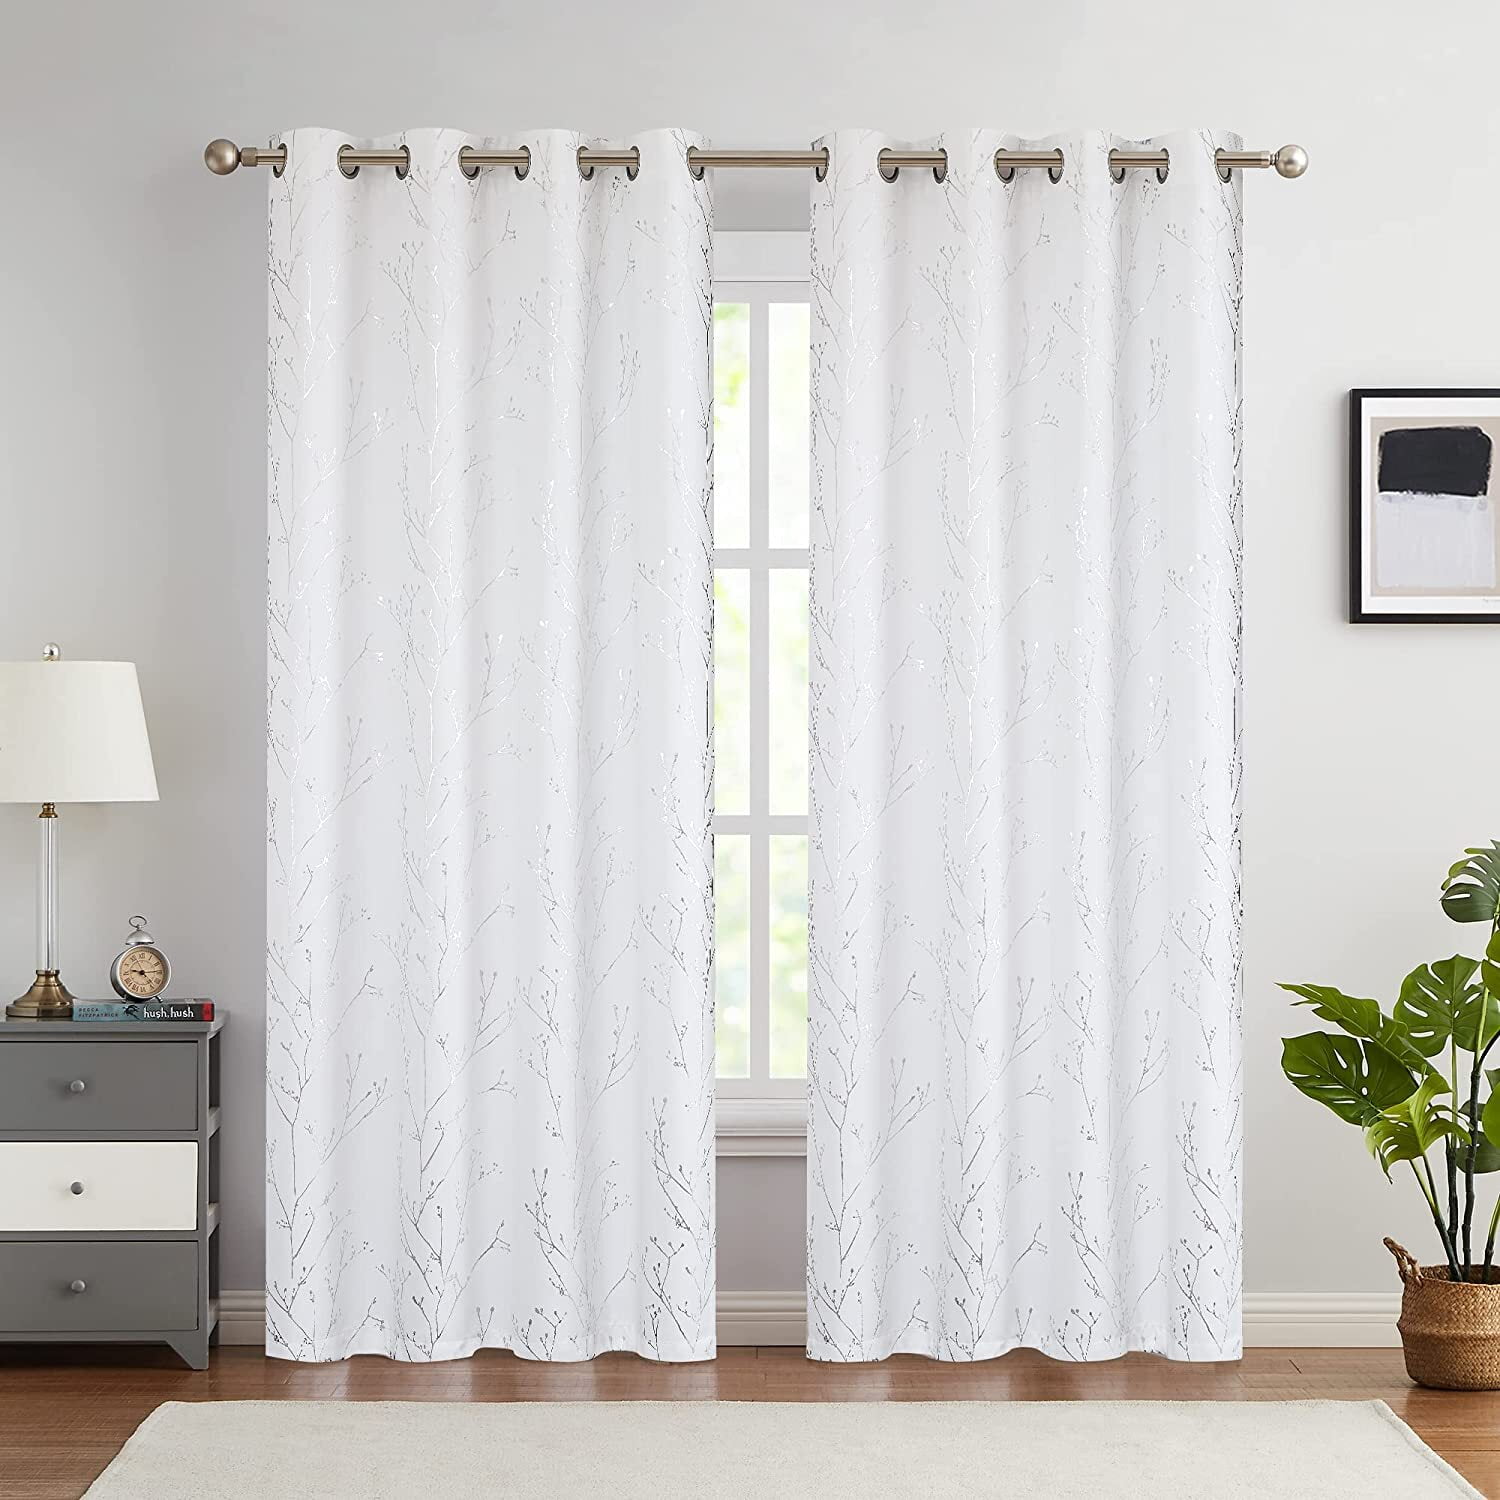 Vangao Blackout White Curtains for Bedroom Living Room Tree Branch ...